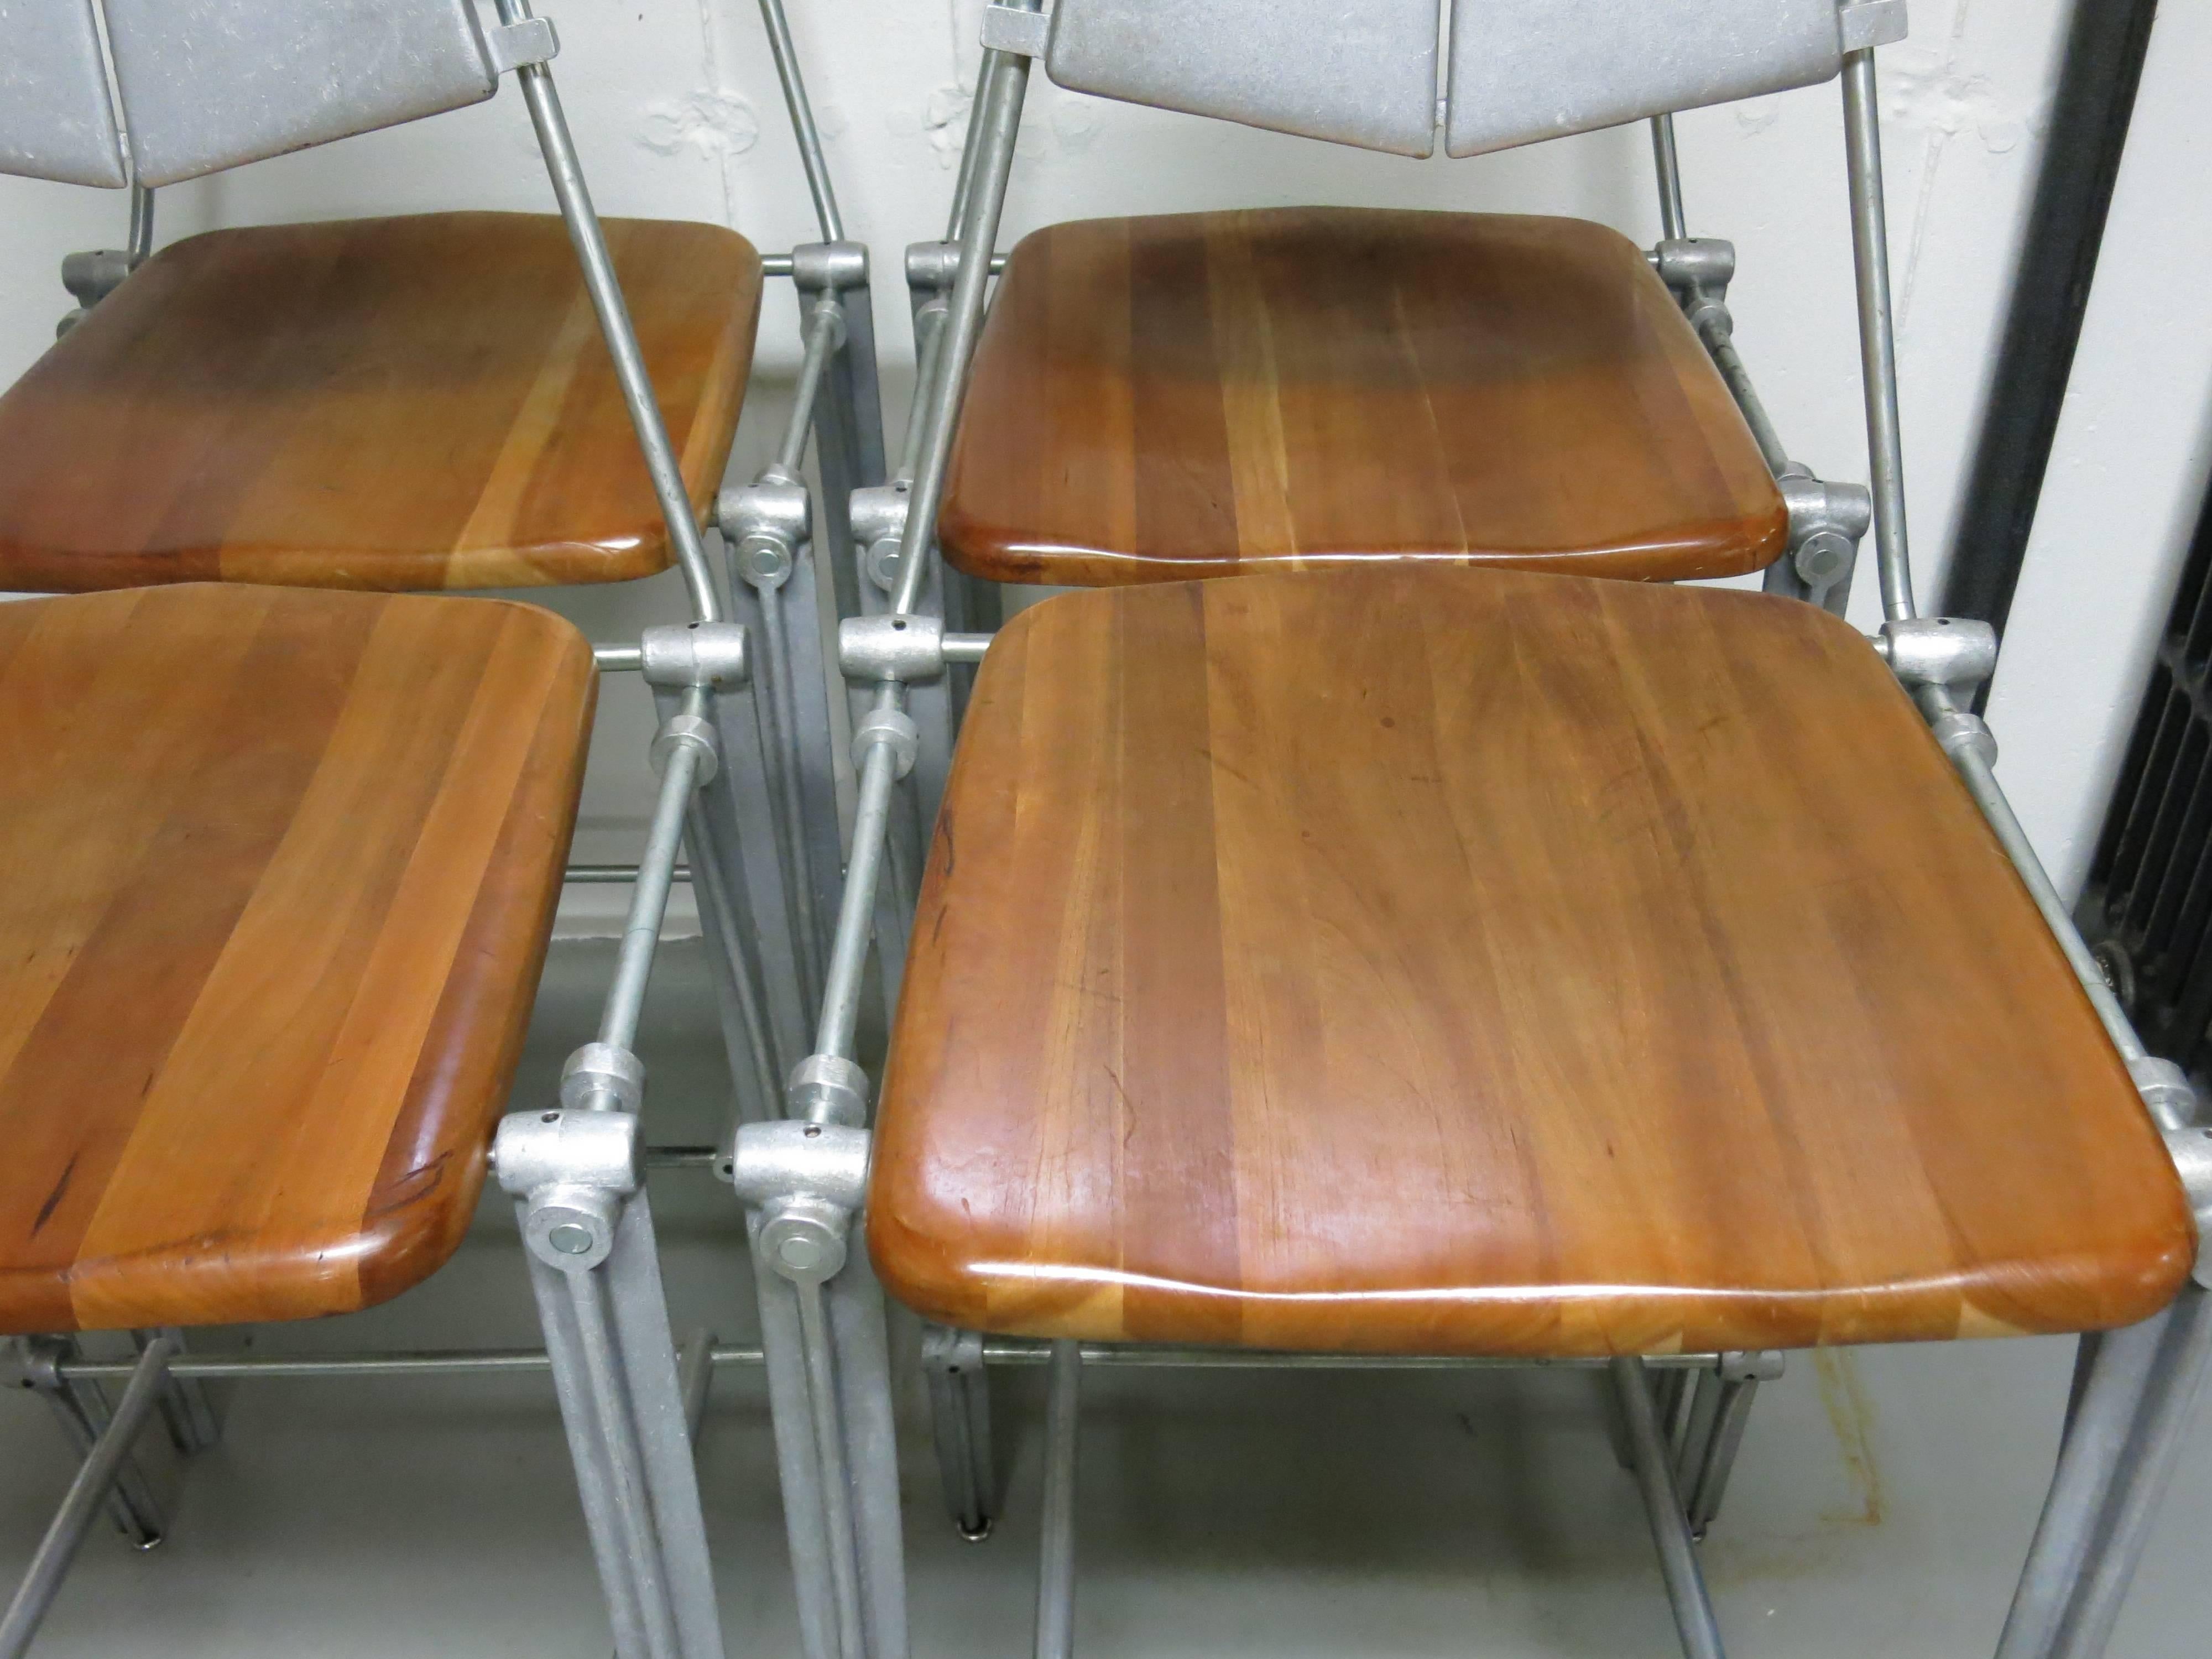 Nice set of 4 Robert Josten cast aluminum and maple bar stools.   A modern industrial style stool from the California designer dating from the 80's.  Seats are at a custom height of 27